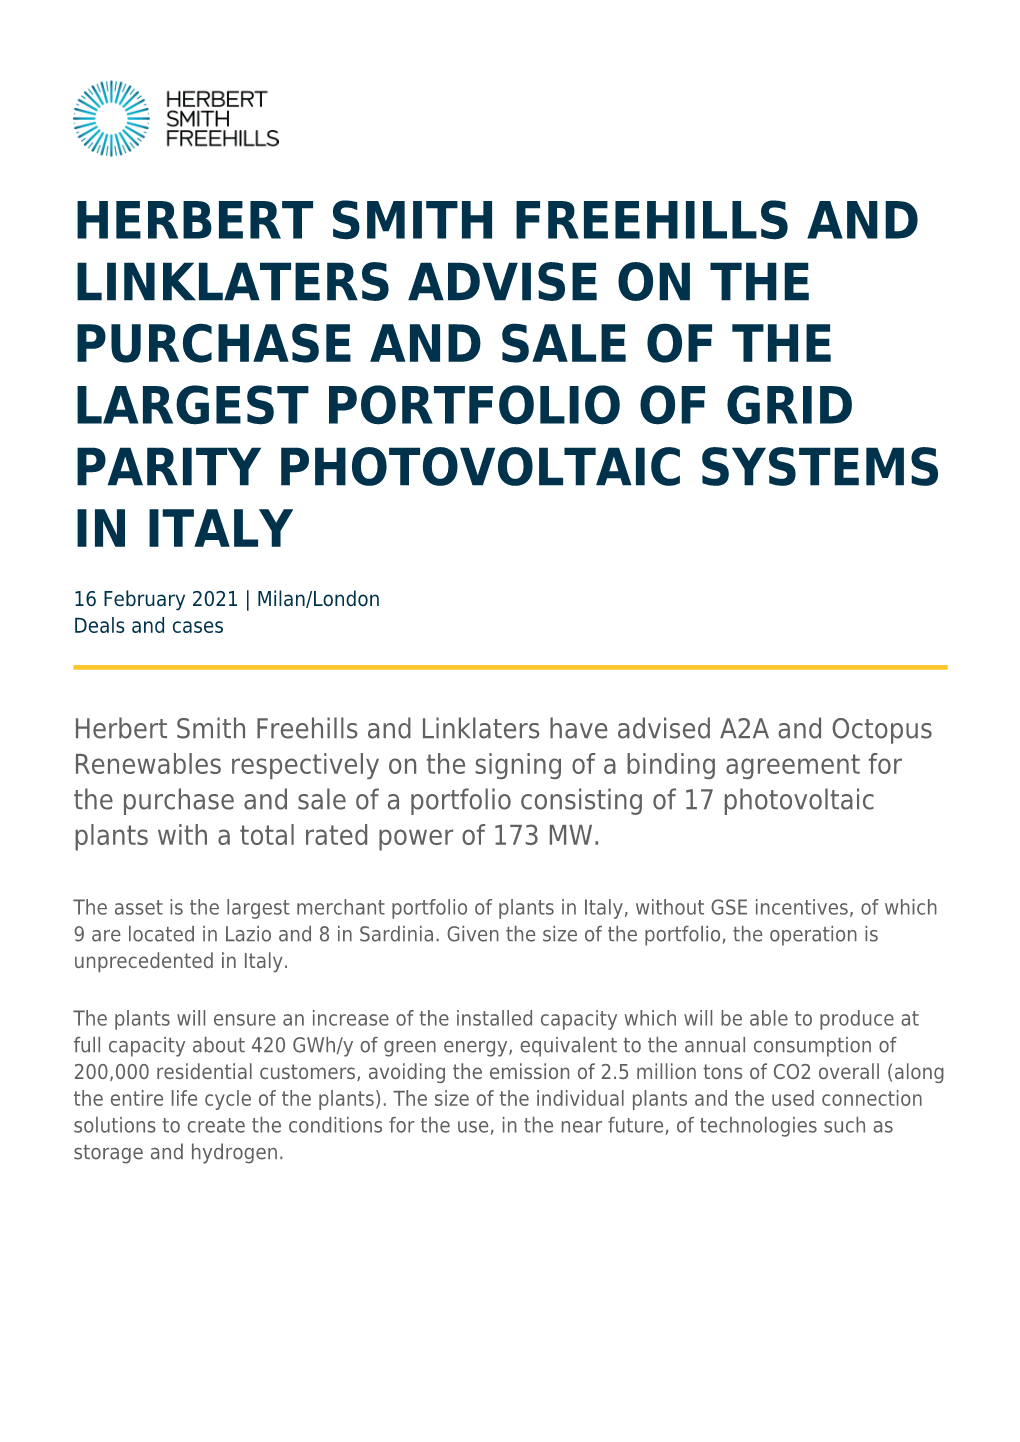 Herbert Smith Freehills and Linklaters Advise on the Purchase and Sale of the Largest Portfolio of Grid Parity Photovoltaic Systems in Italy